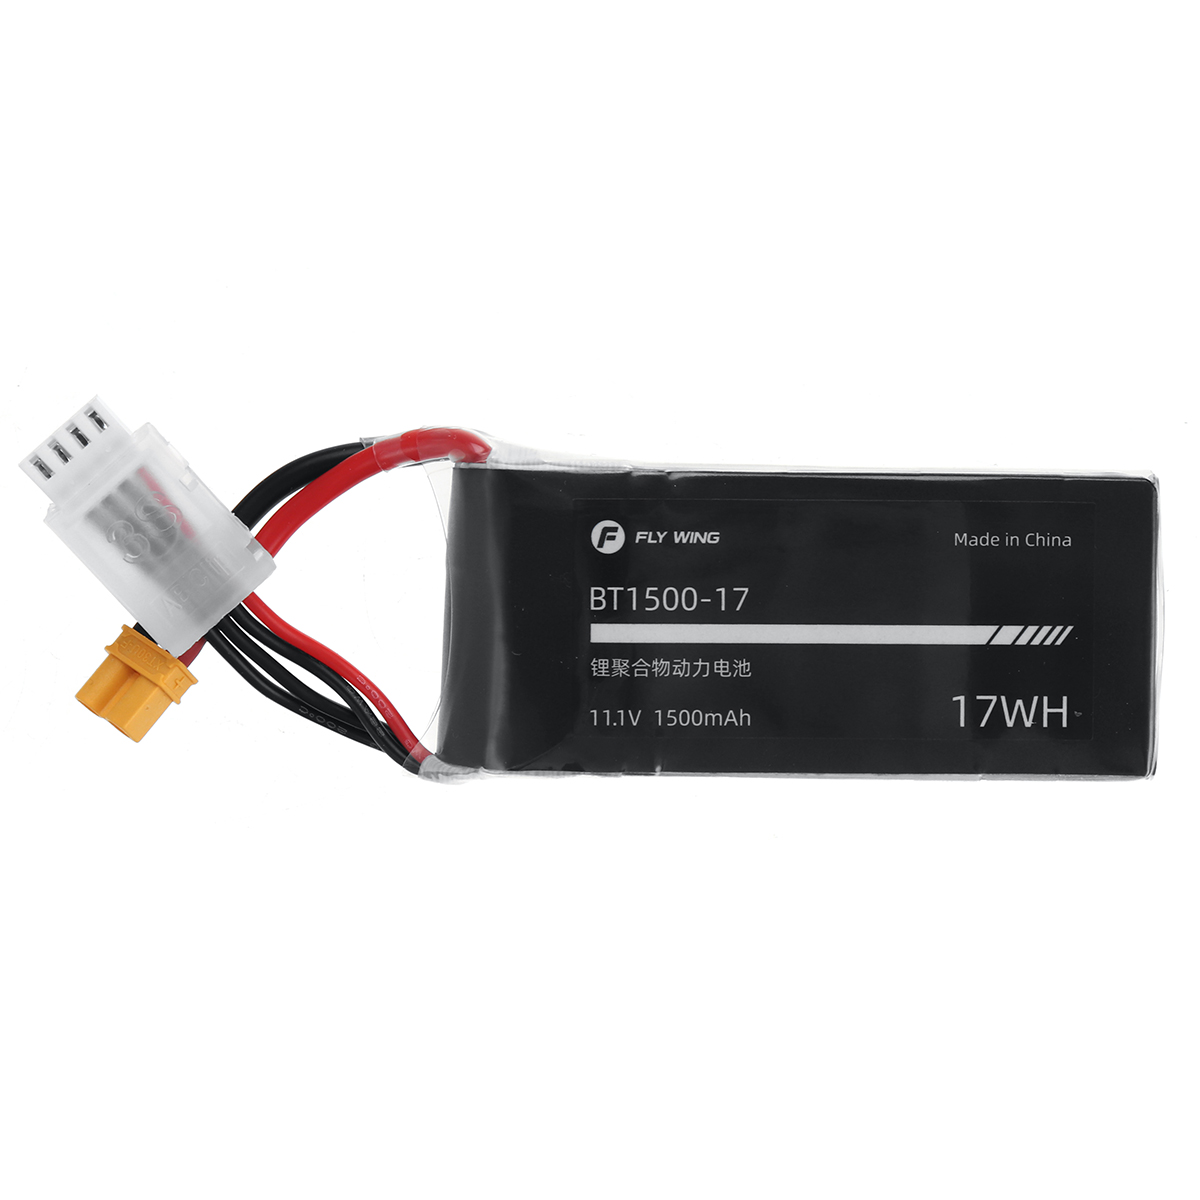 Flywing FW200 RC Helicopter Spare Part 3S 11.1V 17WH 1500mah High Voltage Li-ion Polymer Battery